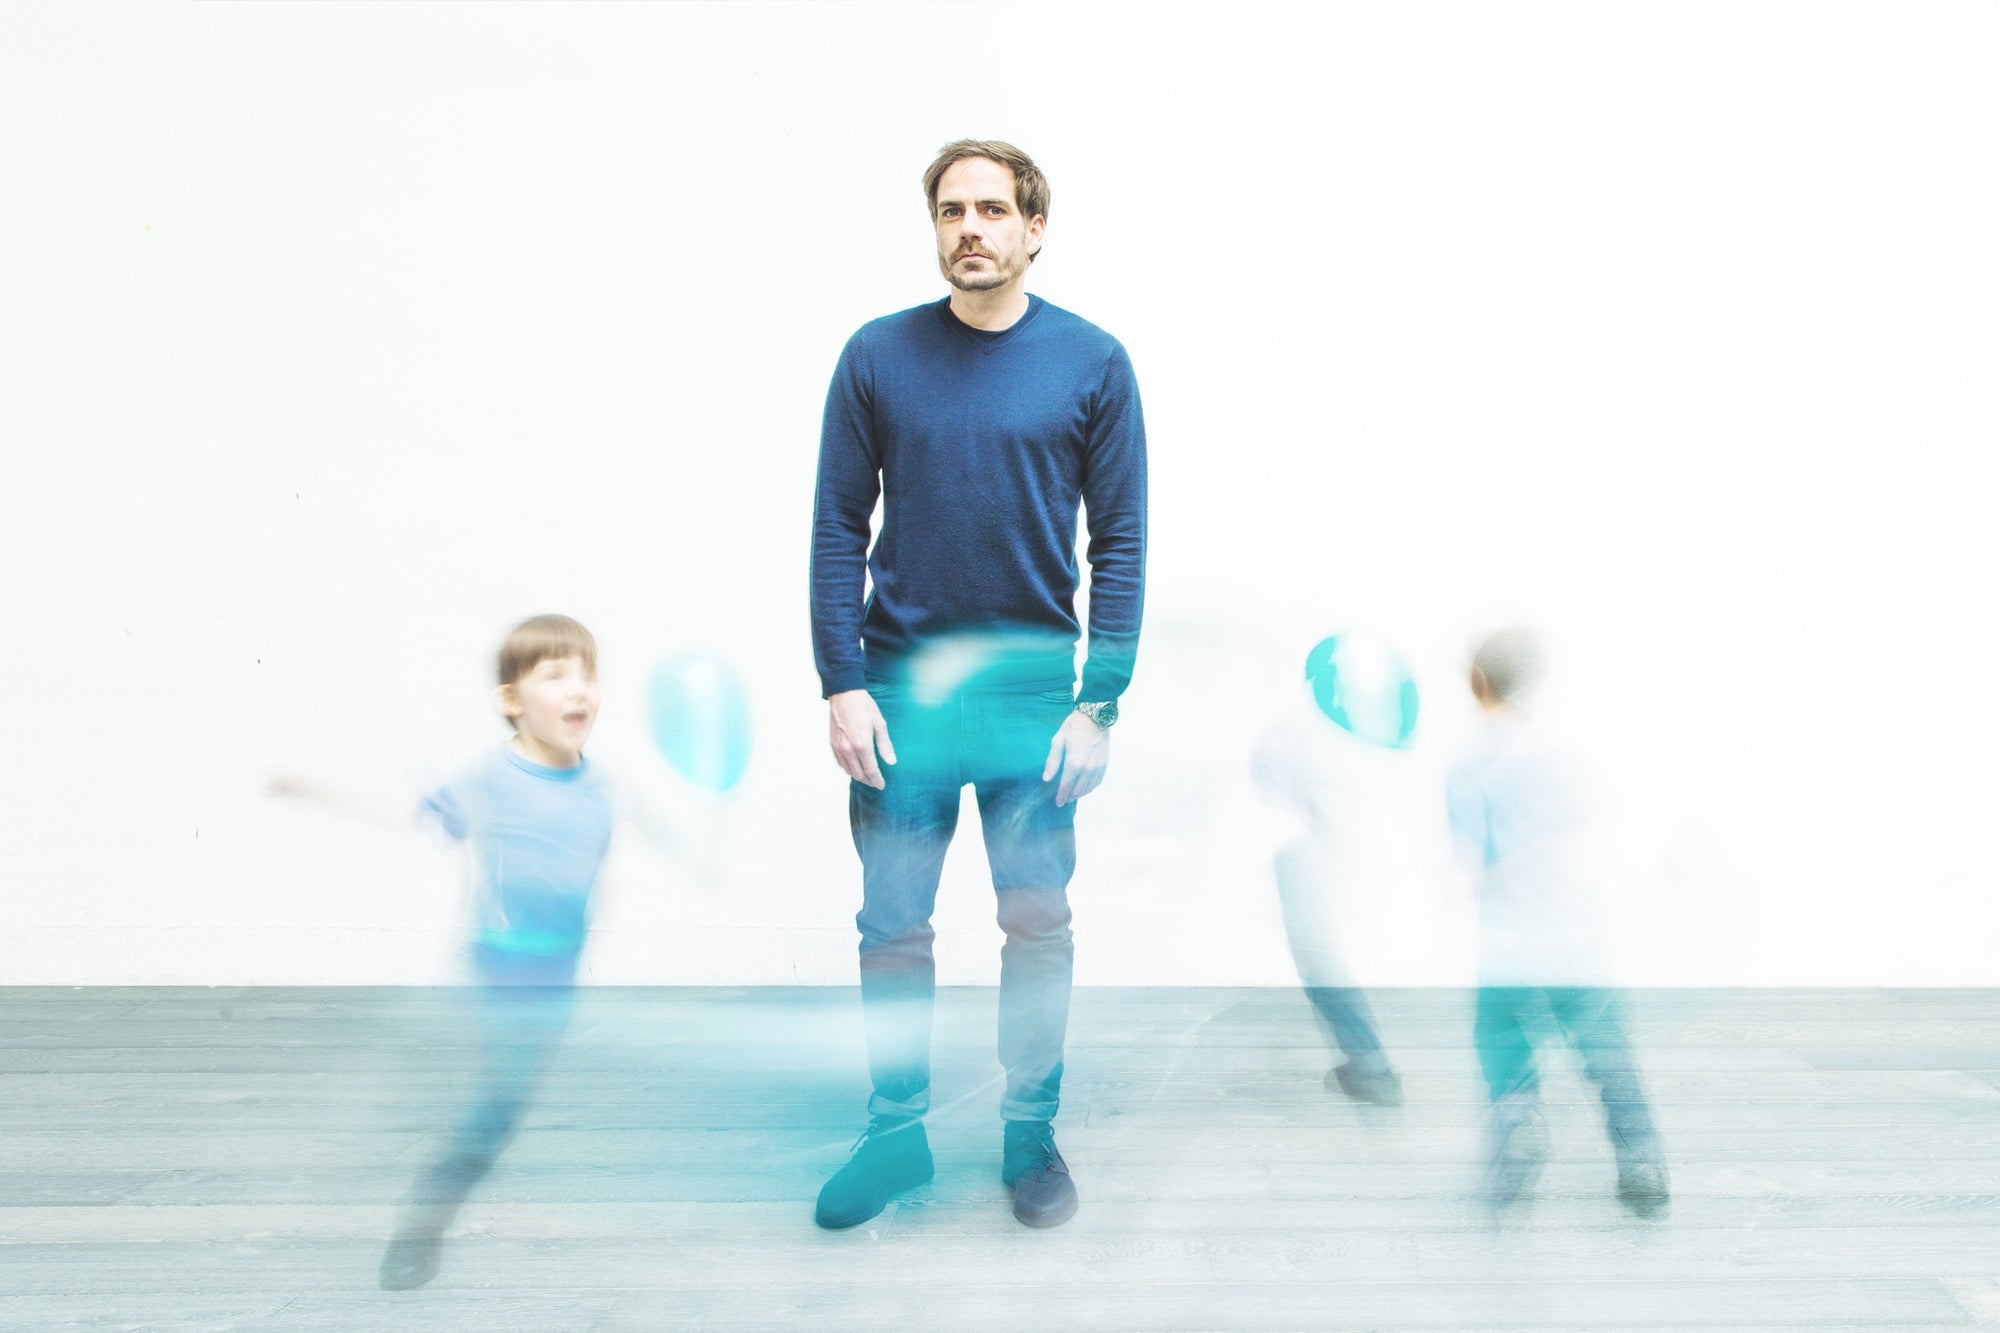 man standing and blur image of kids playing